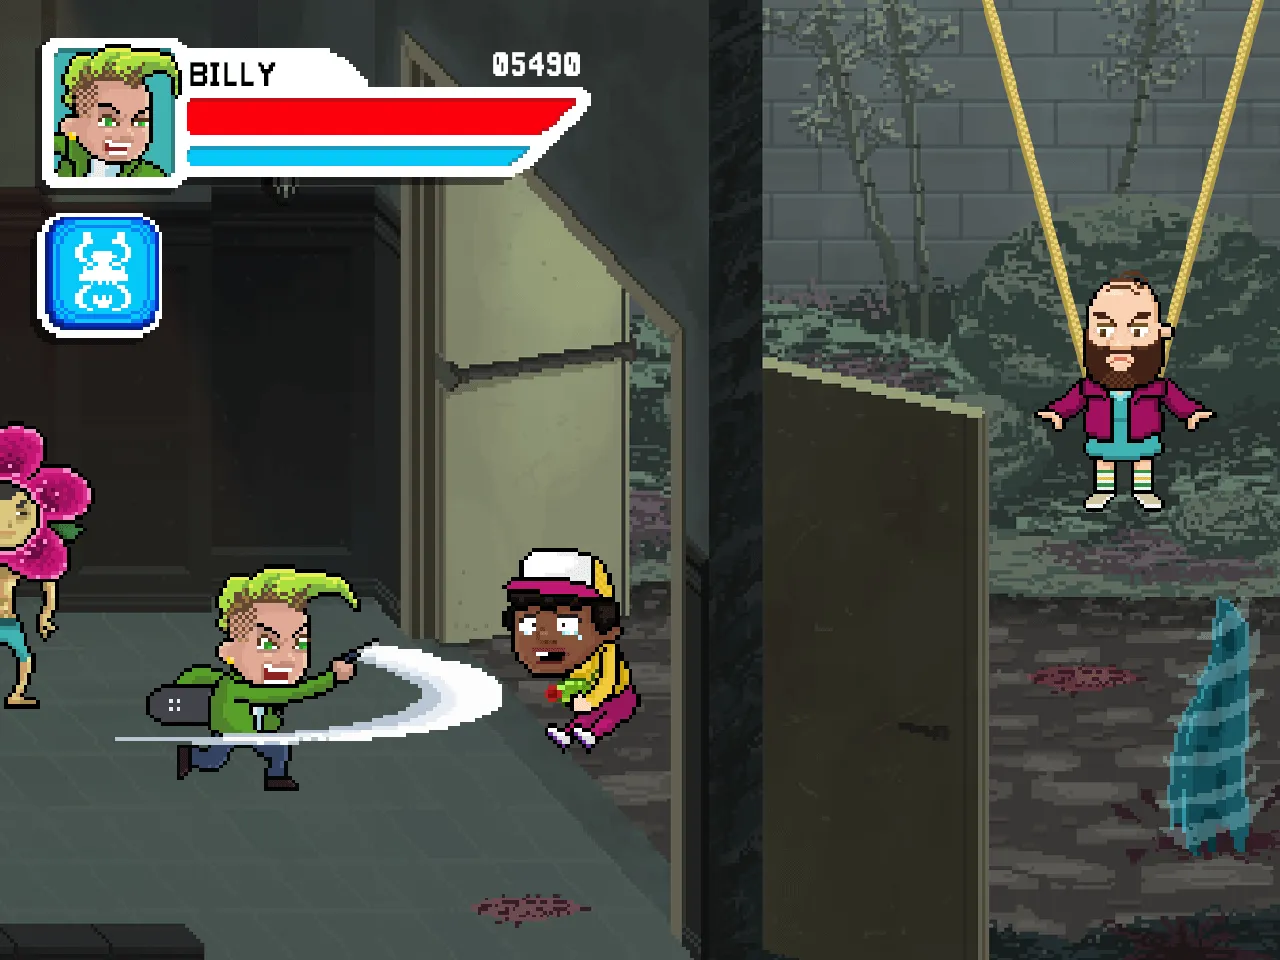 Poject - <p>A browser-based game made in pixel art like the Beat'em up classic arcade games. Based on FOX's Deadly Class and nominee for Big Brands at the BIG Festival 2019.</p>